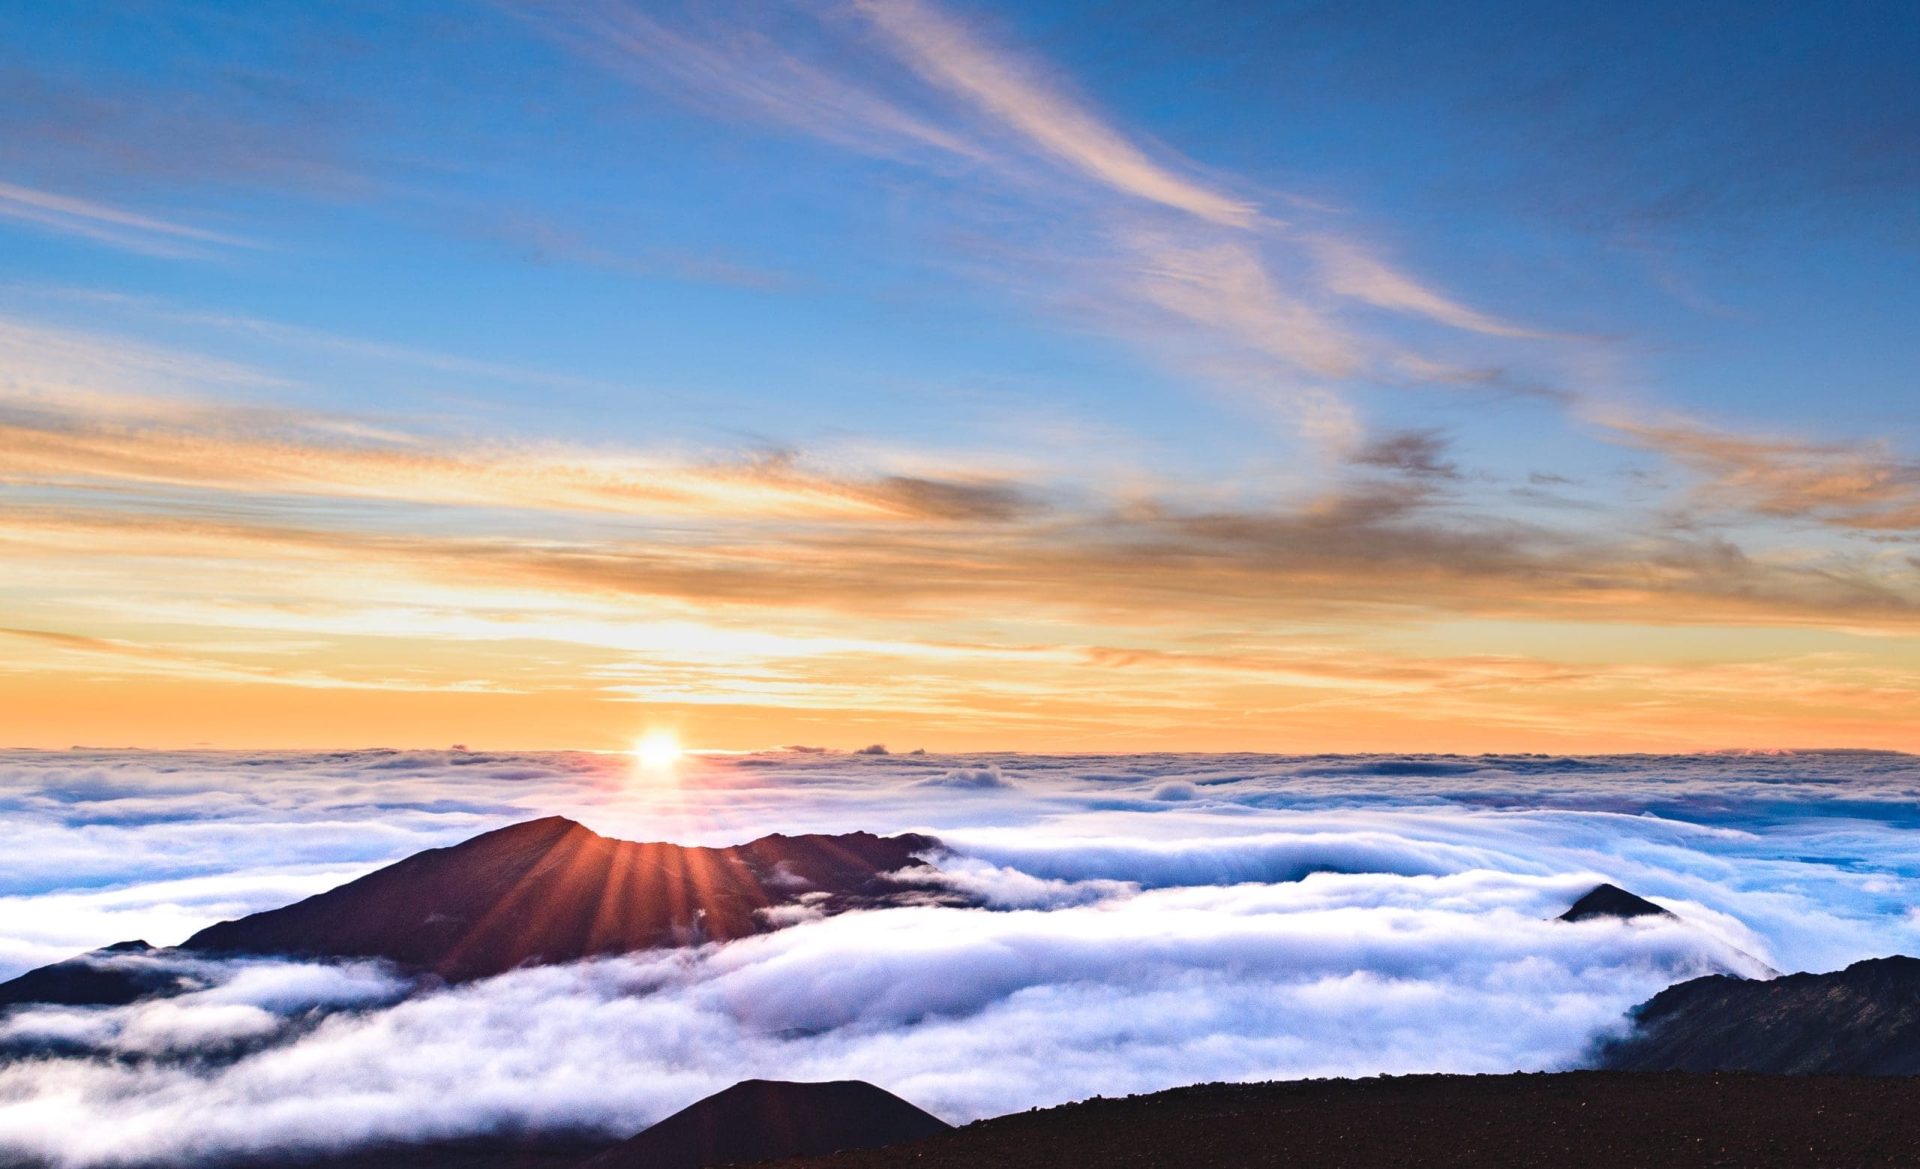 Where is the Best Place to See the Sunrise in Maui?